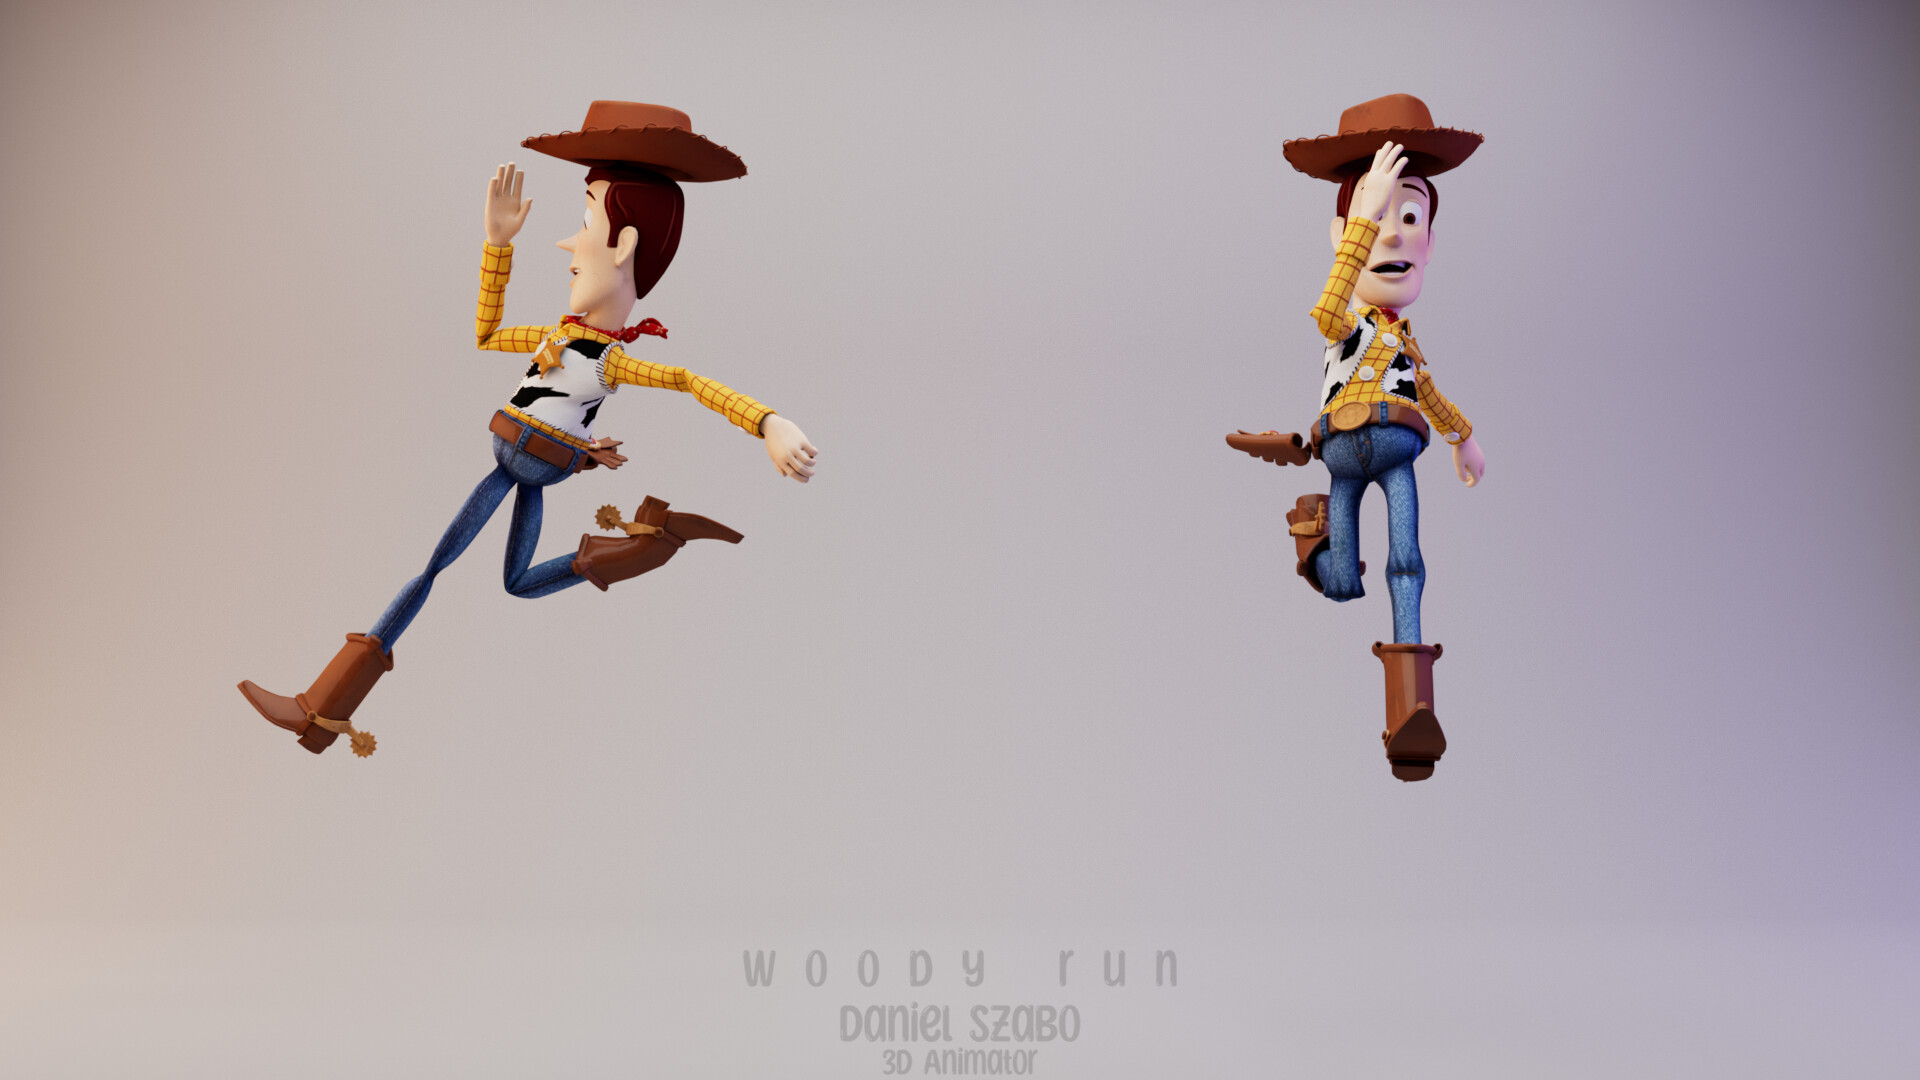 V's Running Animation In Cyberpunk 2077 Looks A Whole Lot Like Woody From  Toy Story